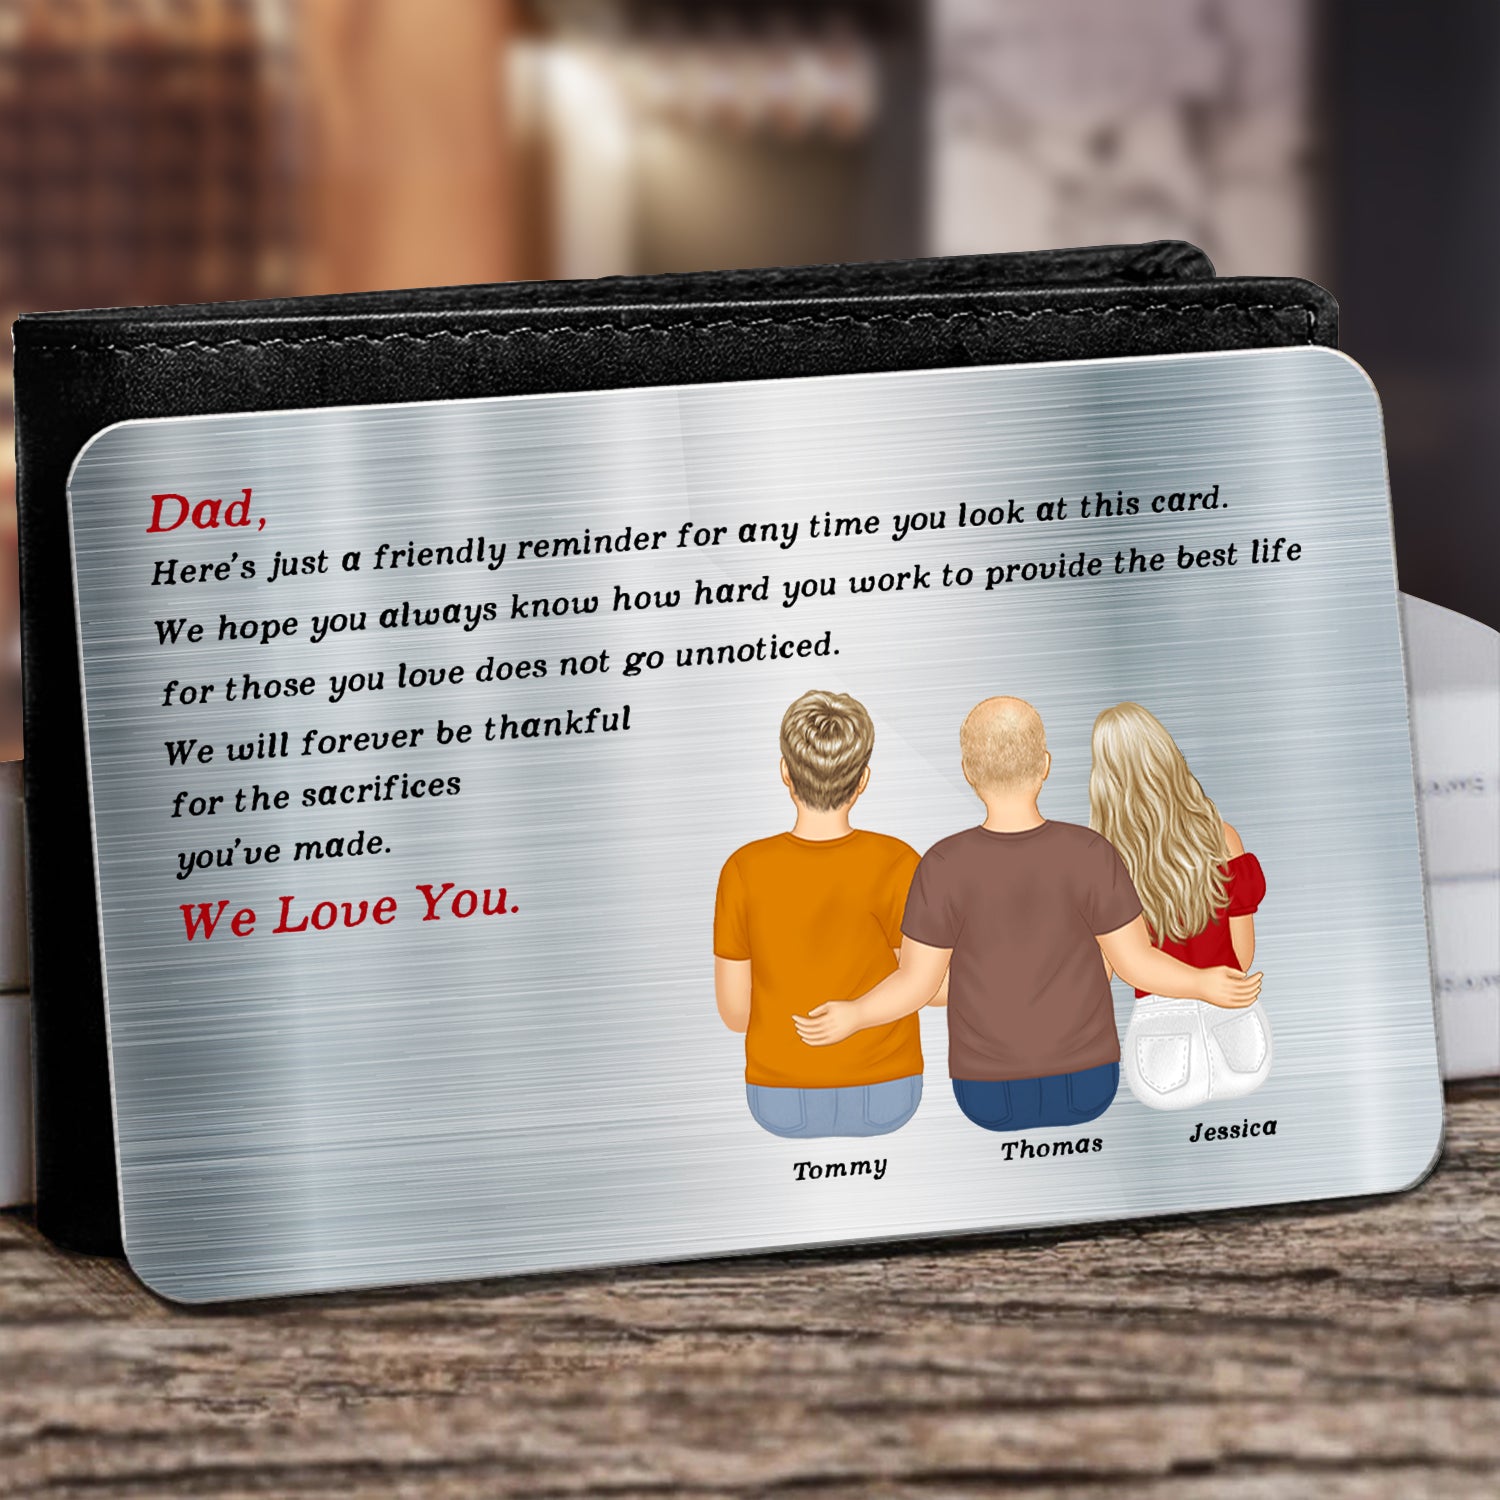 Just A Friendly Reminder - Gift For Dad - Personalized Aluminum Wallet Card